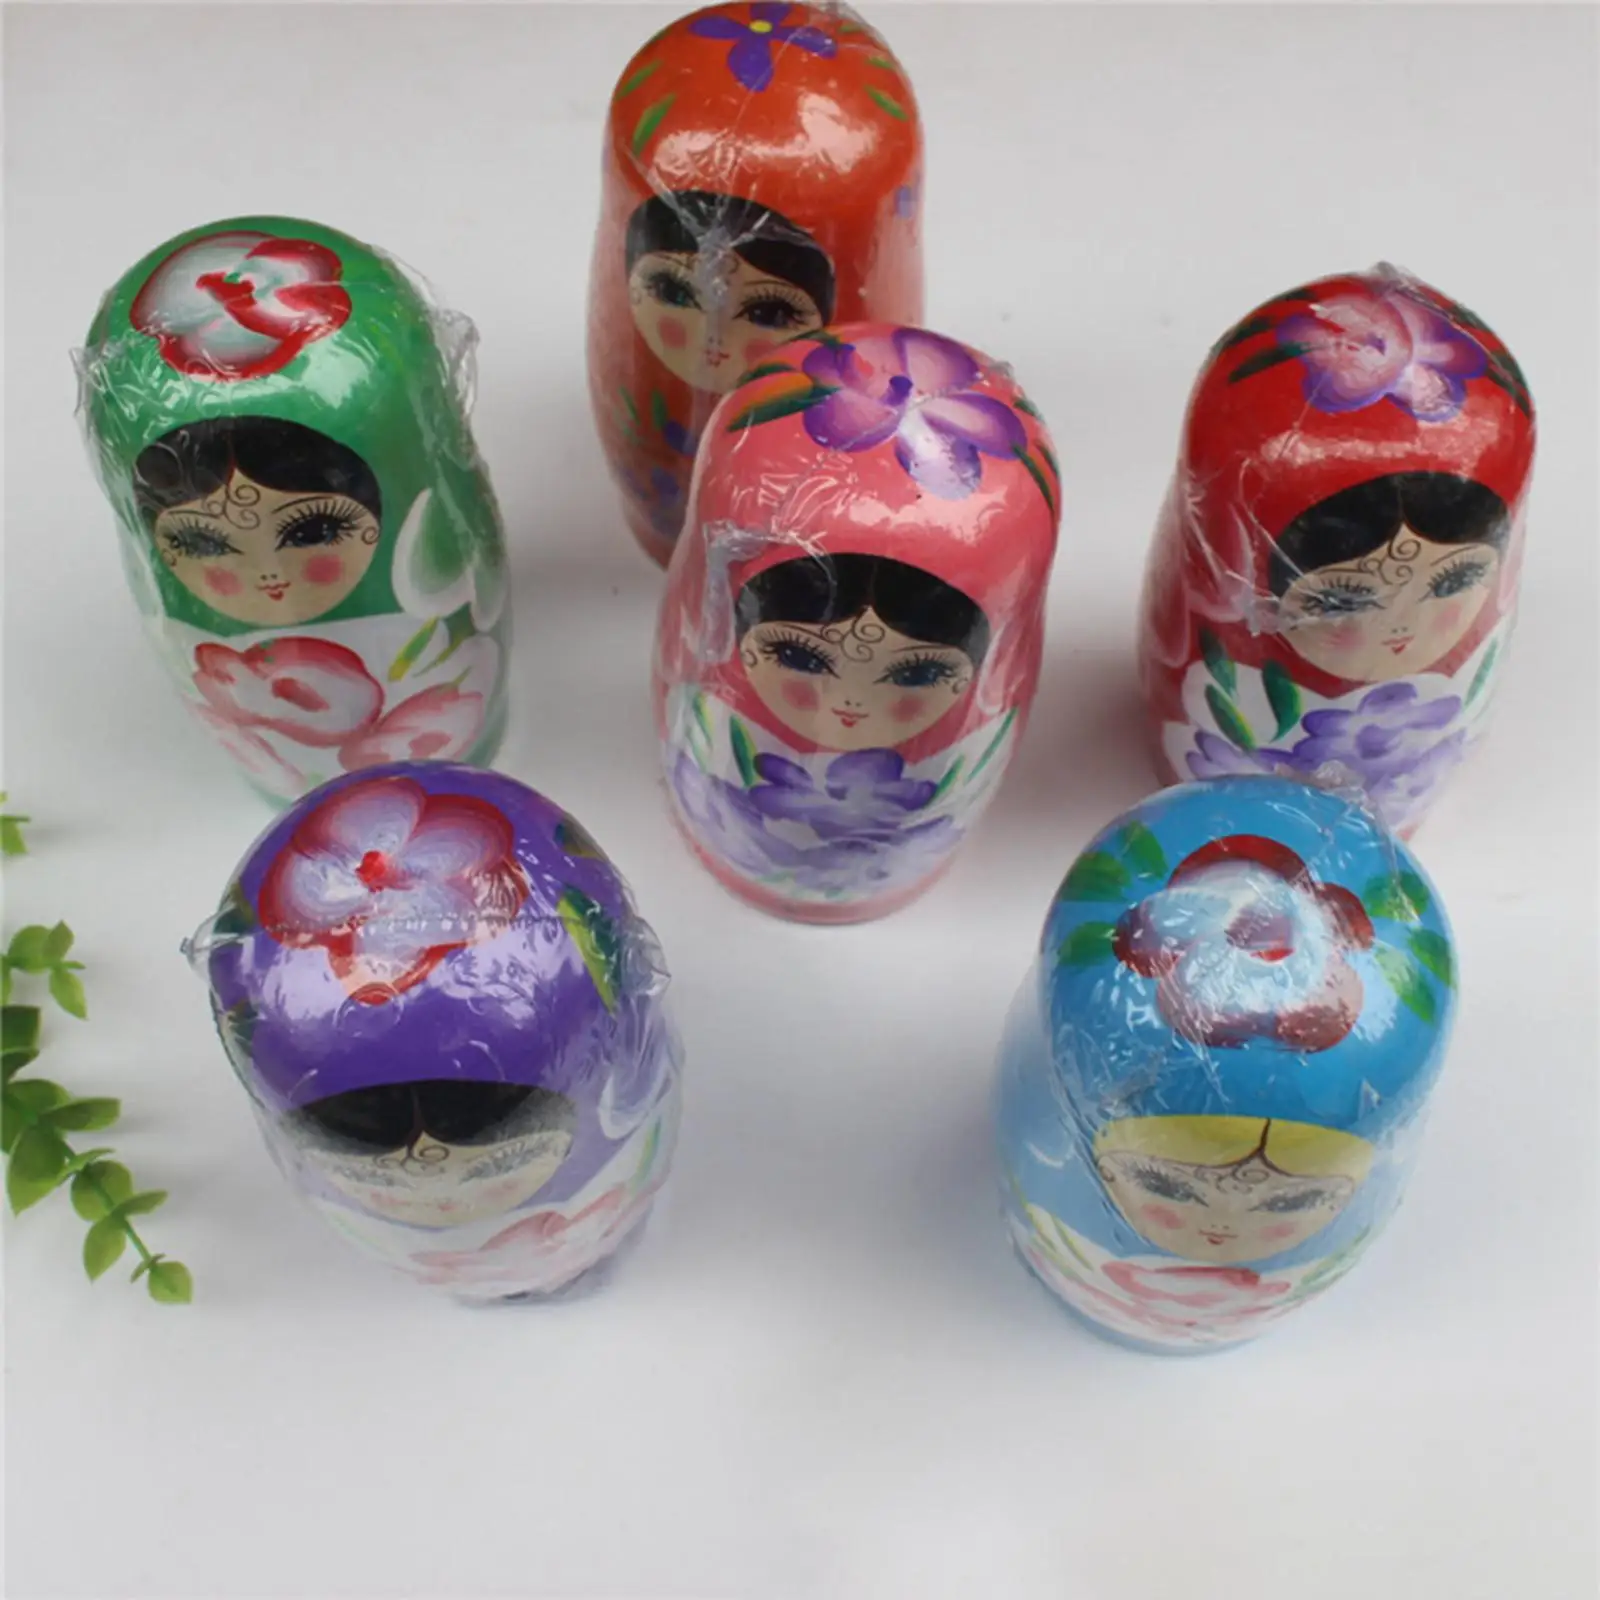 5x Handmade Russian Nesting Doll Stacking Figures Collectible Crafts Wooden Matryoshka Dolls for Room Office home Ornament